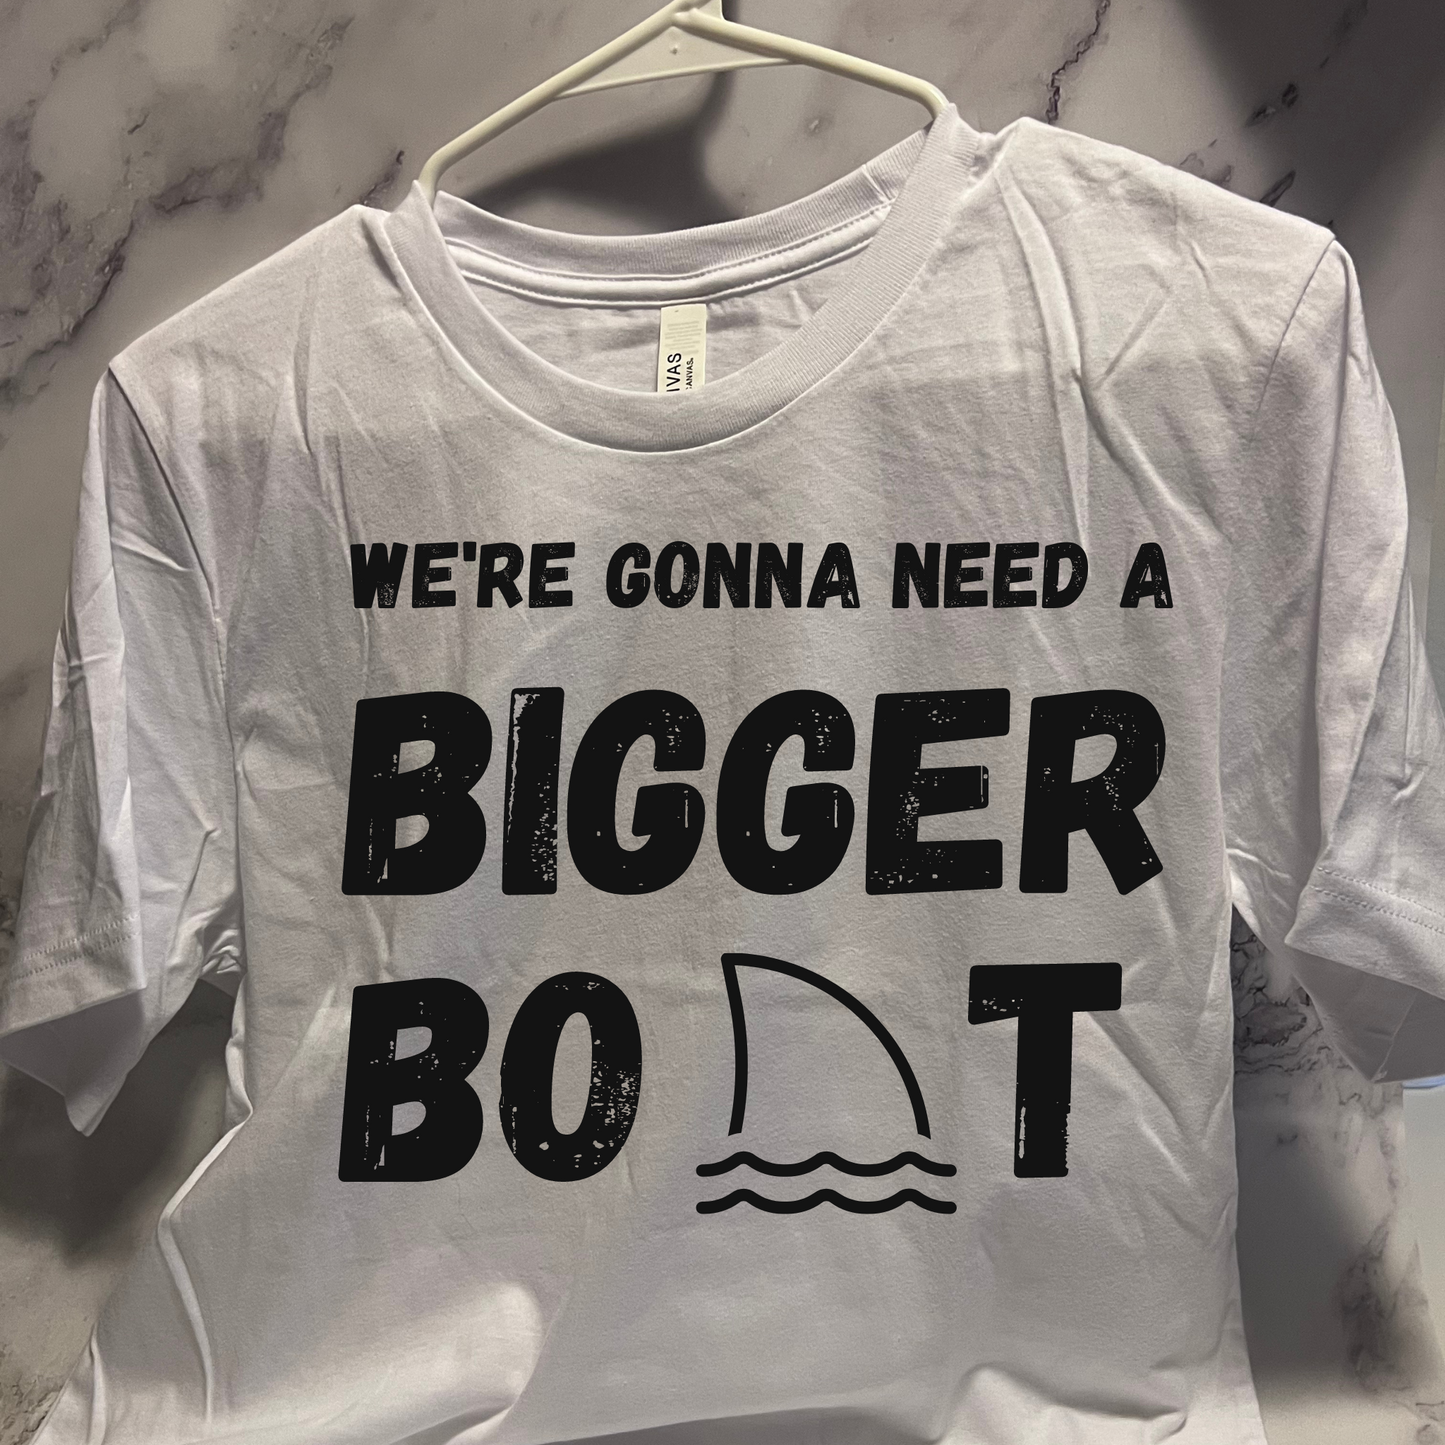 We're gonna need a bigger boat, Funny boat shirt, short sleeve unisex t-shirt, for men or women